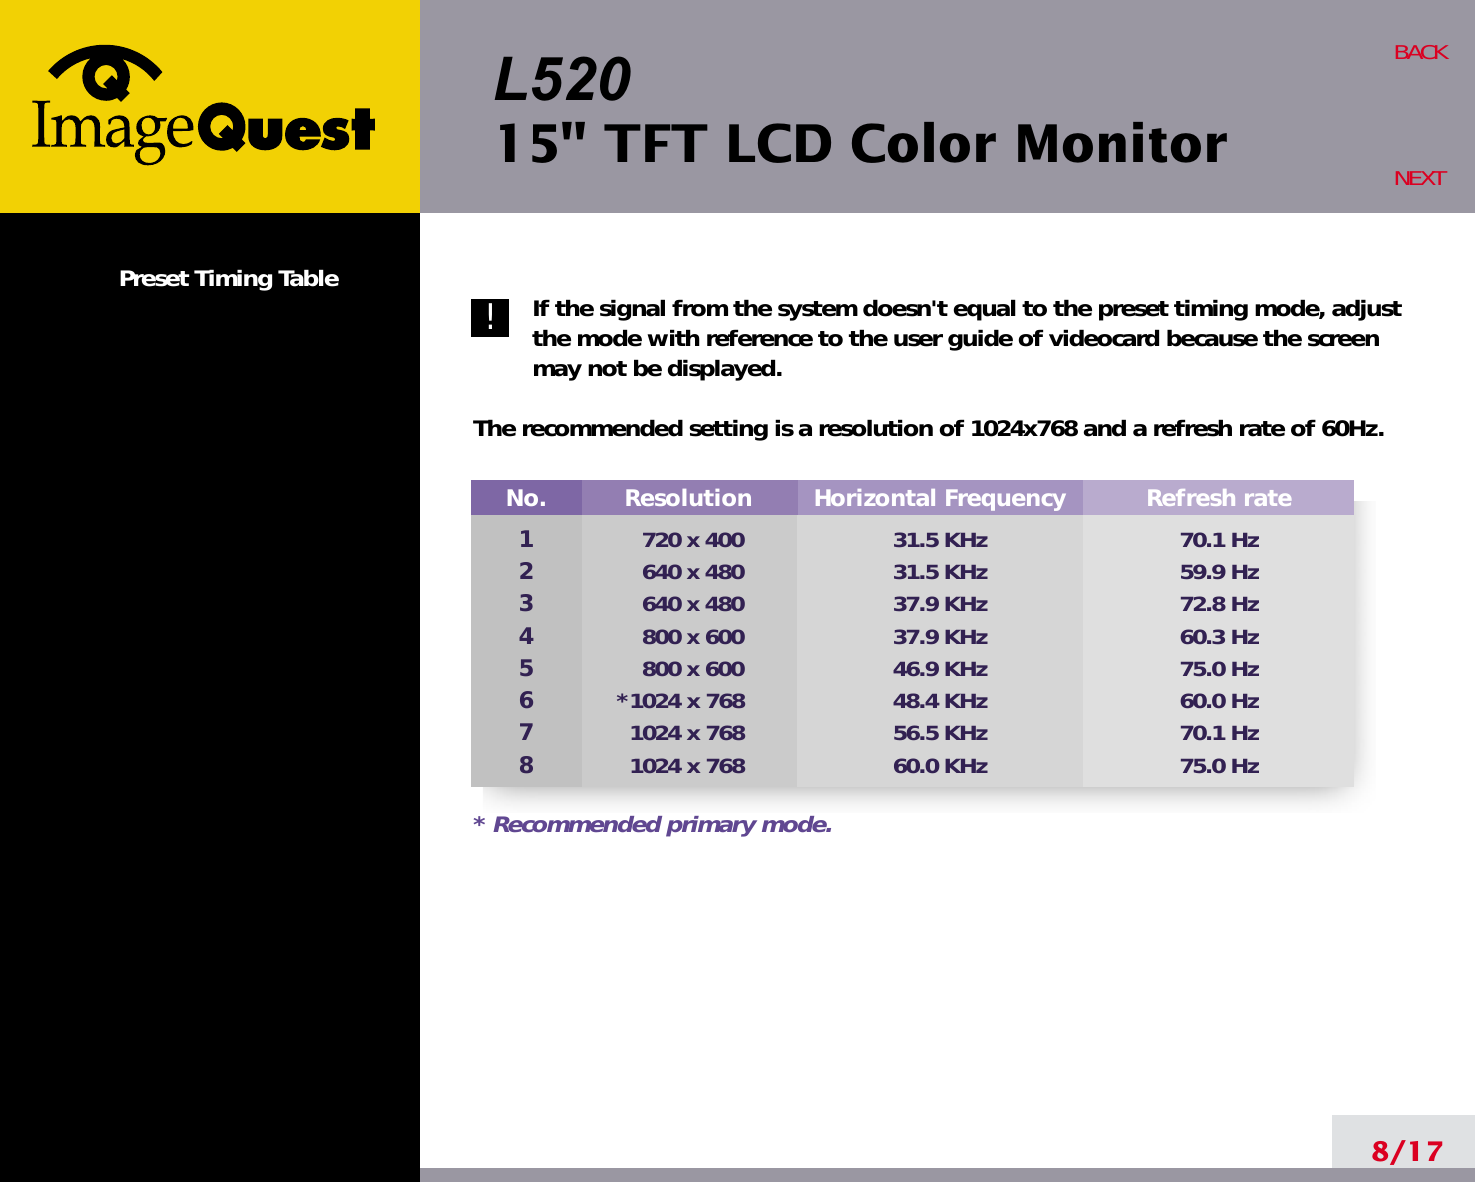 L52015&quot; TFT LCD Color MonitorNo.12345678Resolution720 x 400640 x 480640 x 480800 x 600800 x 600*1024 x 7681024 x 7681024 x 768Horizontal Frequency31.5 KHz31.5 KHz37.9 KHz37.9 KHz46.9 KHz48.4 KHz56.5 KHz60.0 KHzRefresh rate70.1 Hz59.9 Hz72.8 Hz60.3 Hz75.0 Hz60.0 Hz70.1 Hz75.0 Hz* Recommended primary mode.Preset Timing Table If the signal from the system doesn&apos;t equal to the preset timing mode, adjustthe mode with reference to the user guide of videocard because the screenmay not be displayed.The recommended setting is a resolution of 1024x768 and a refresh rate of 60Hz.8/17BACKNEXT!